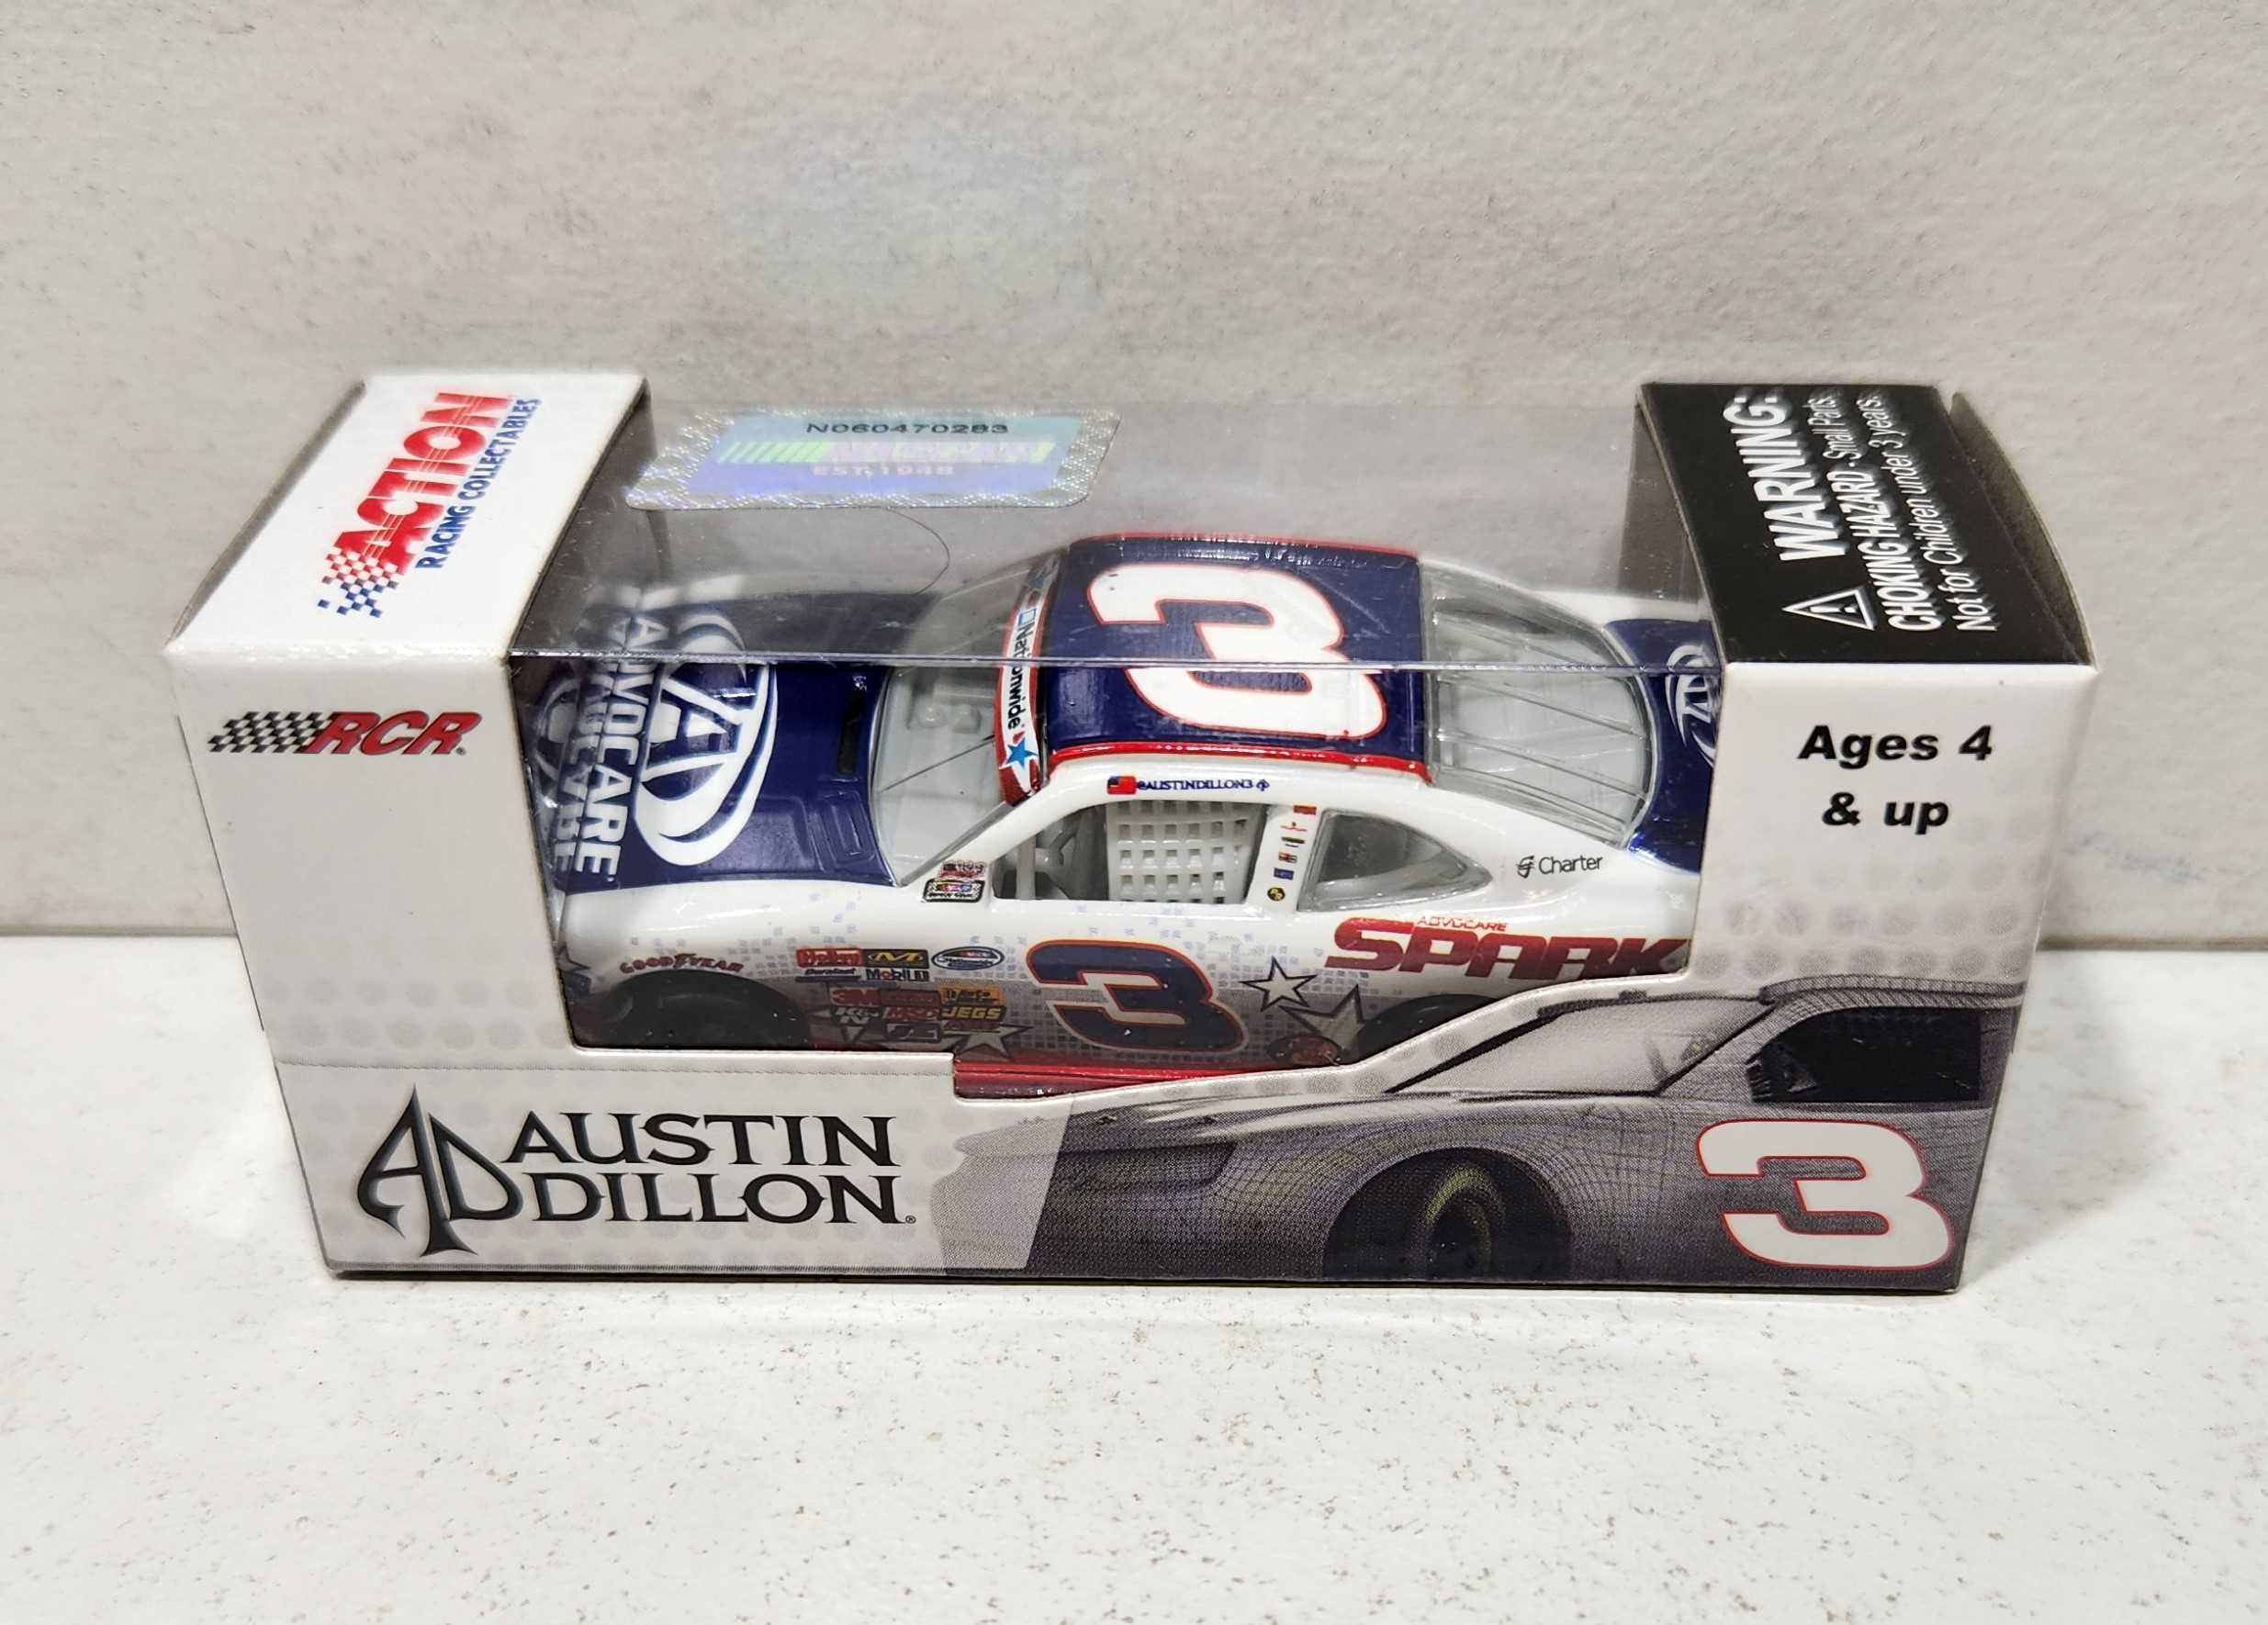 2013 Austin Dillon 1/64th Advocare Spark "Salutes" "Nationwide Series" Pitstop Series Camaro